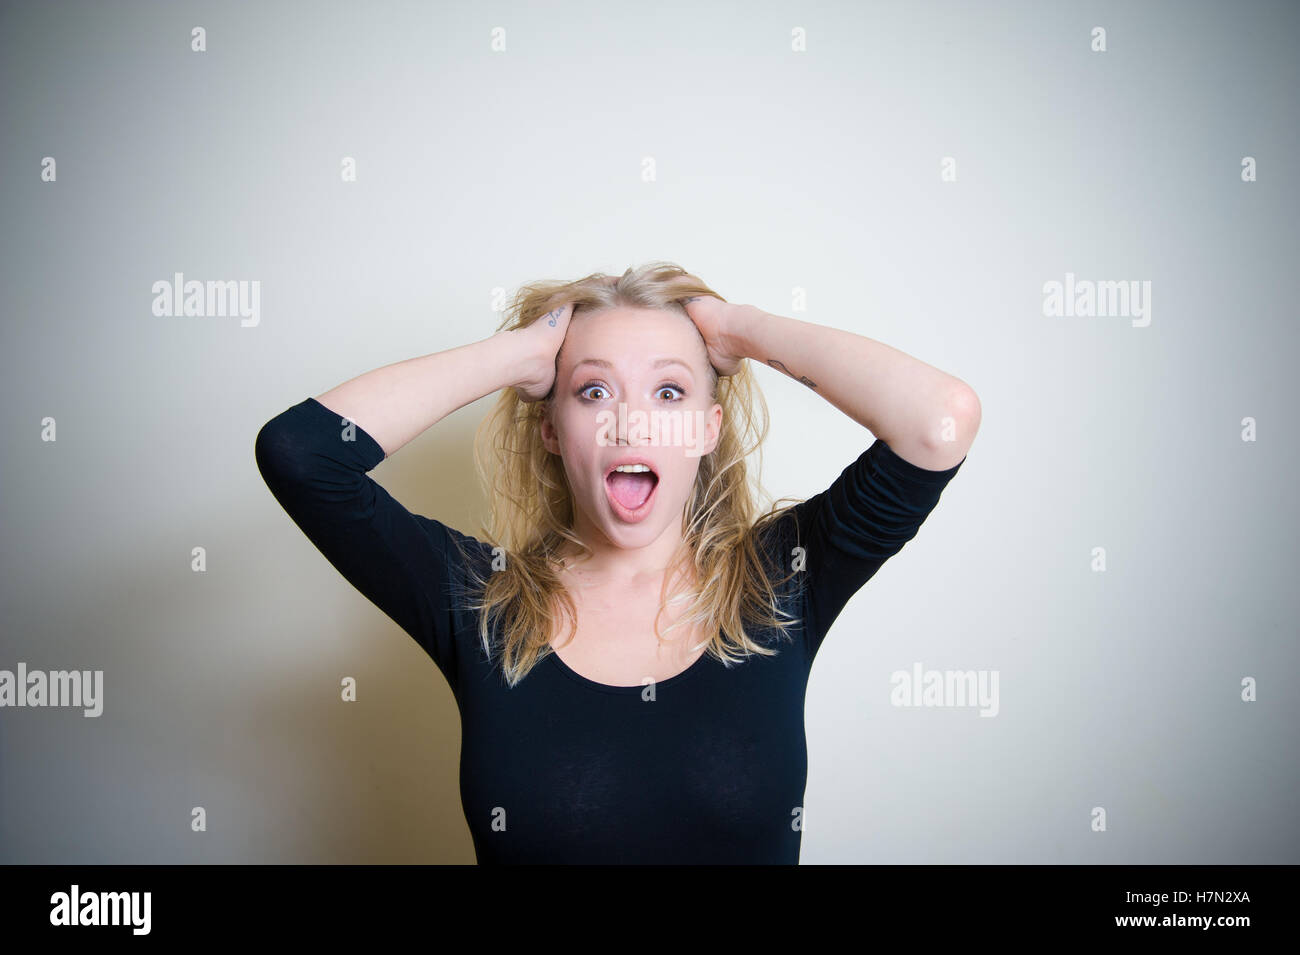 Young blond woman, black shirt, astonished crying with open mouth looking at camera on white background Stock Photo